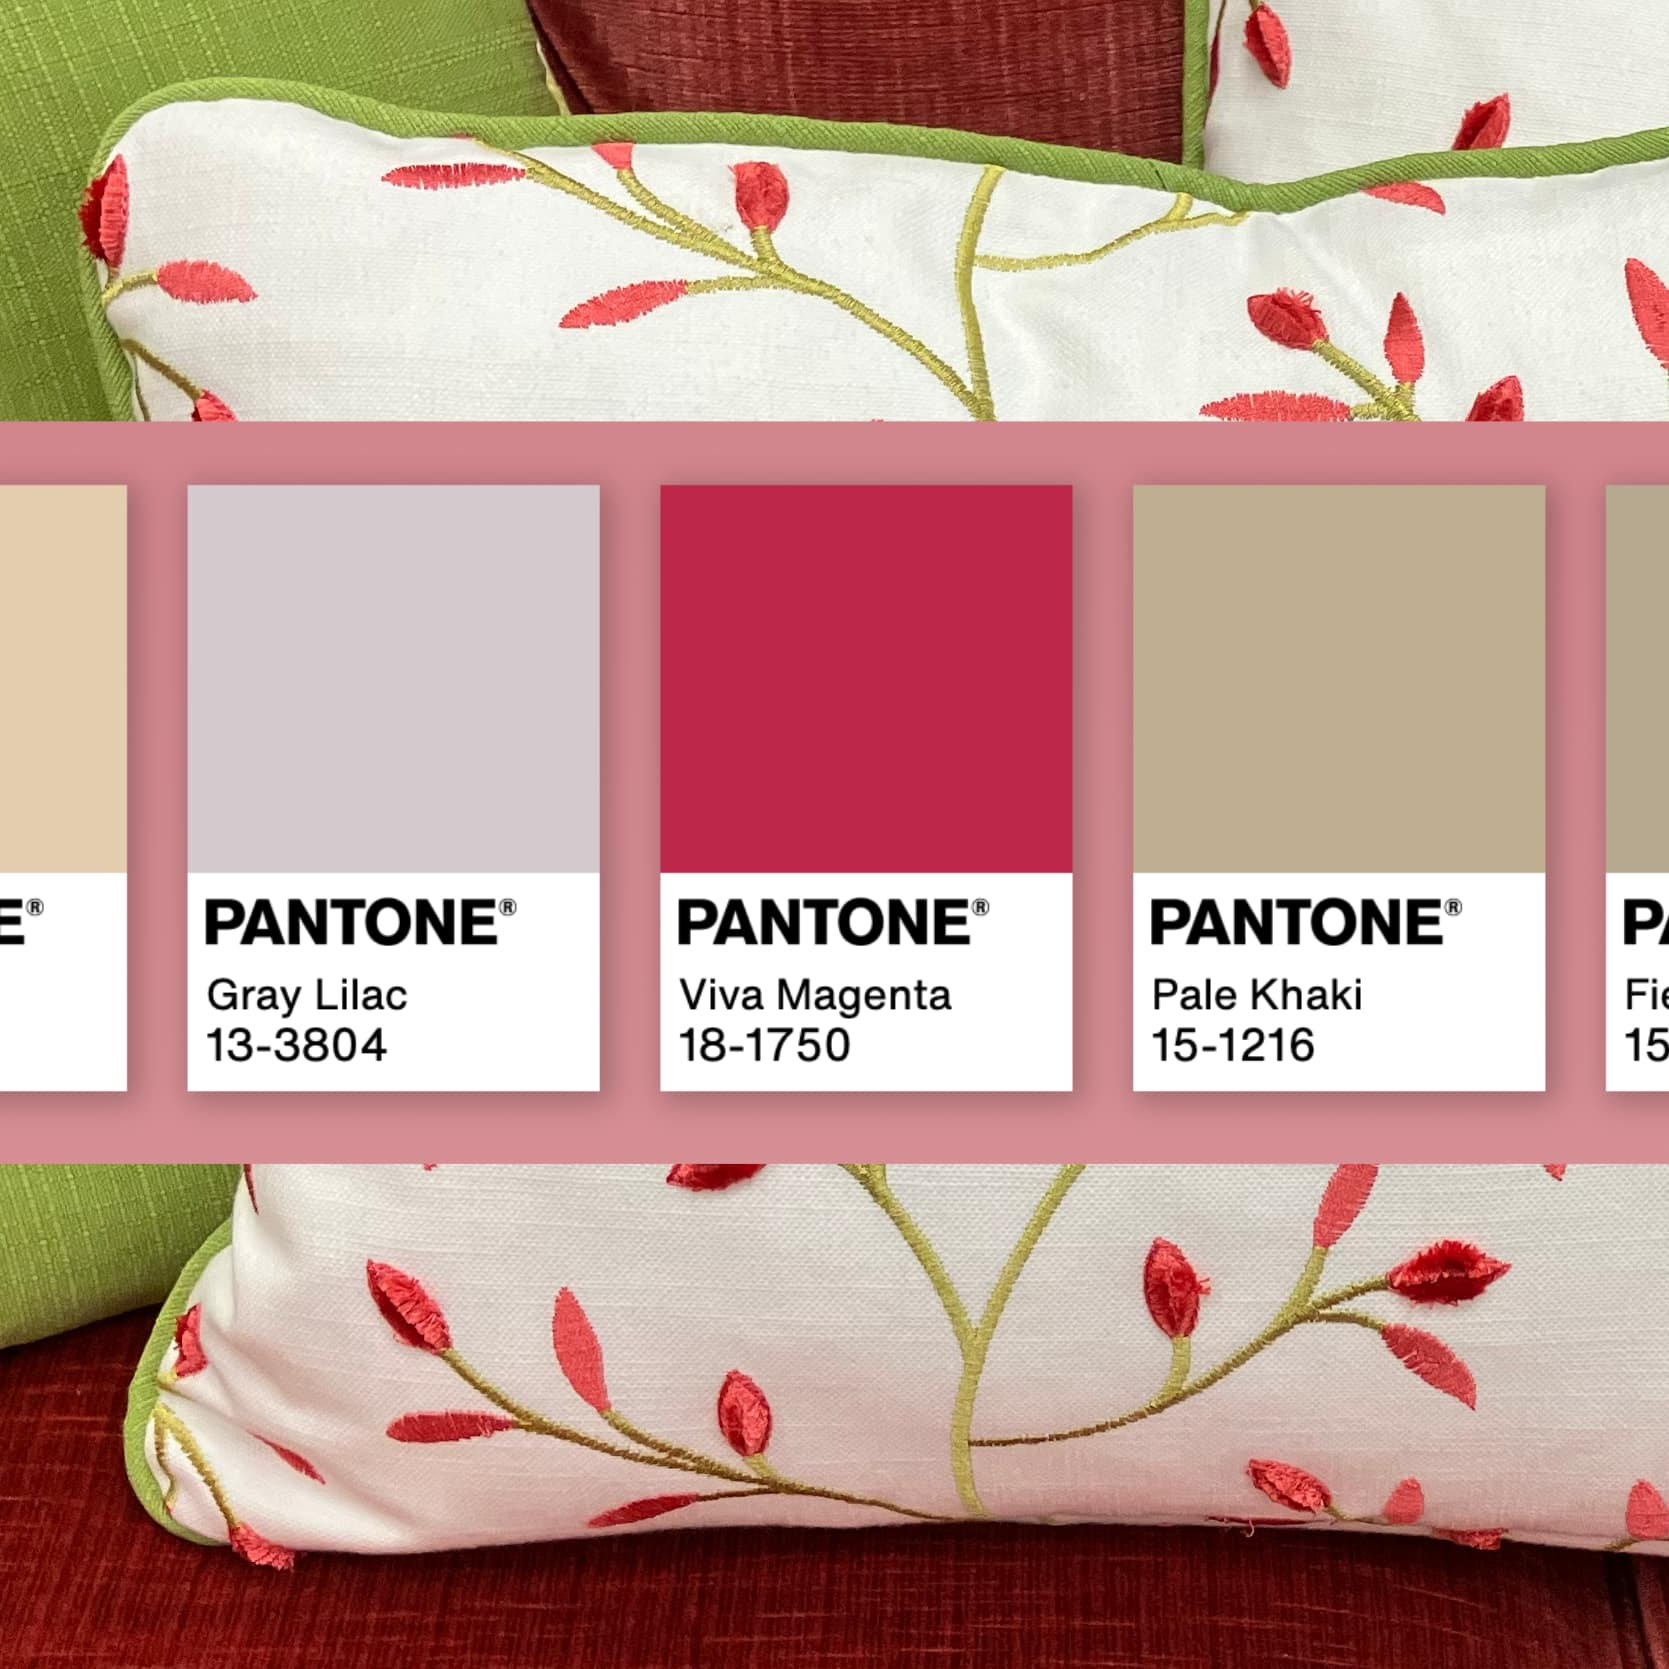 Express yourself this year with Pantone's 'Viva Magenta'!